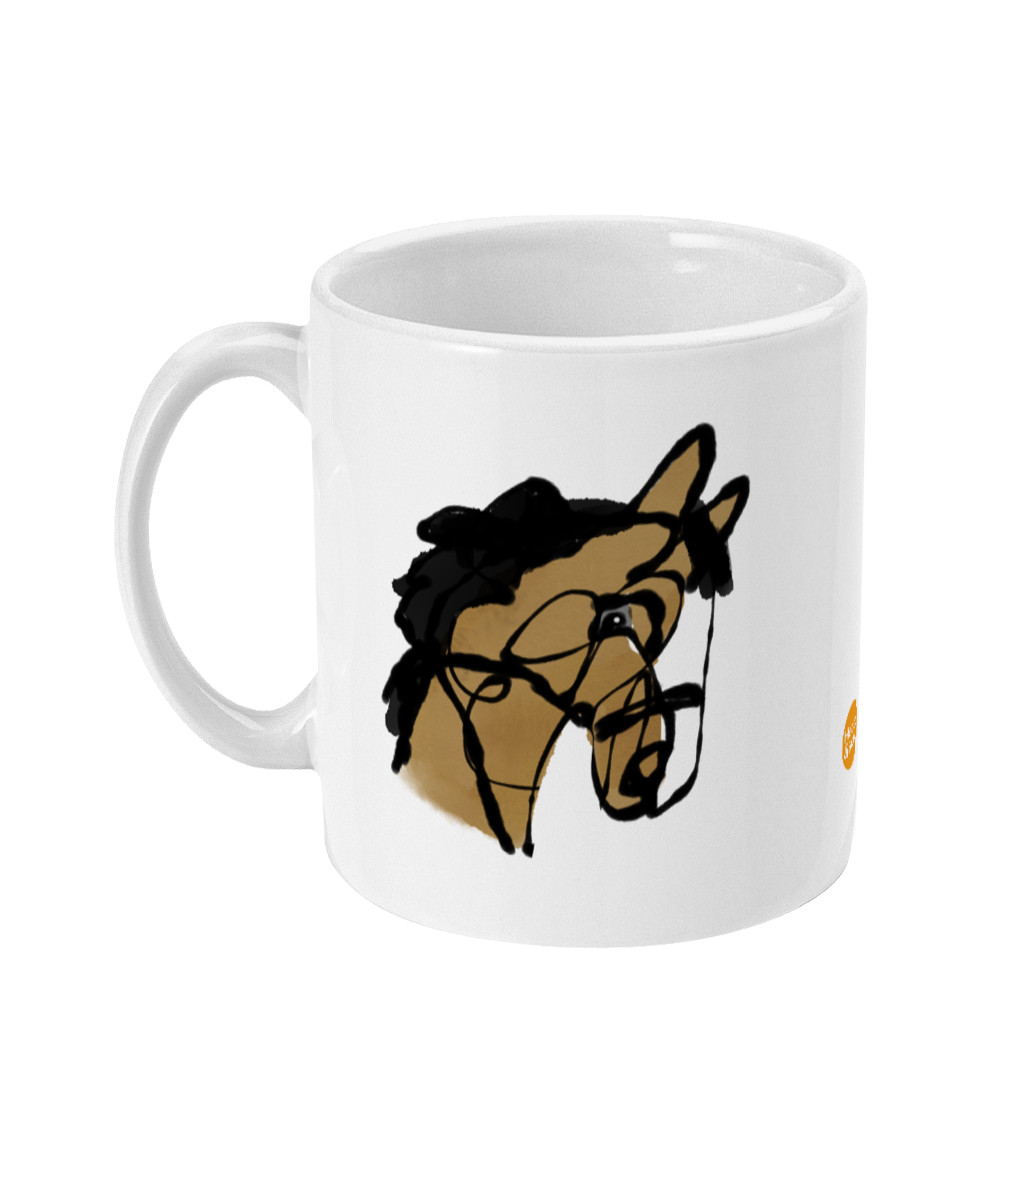 I Love my Horse coffee mug illustrated by Hector and Bone Left View